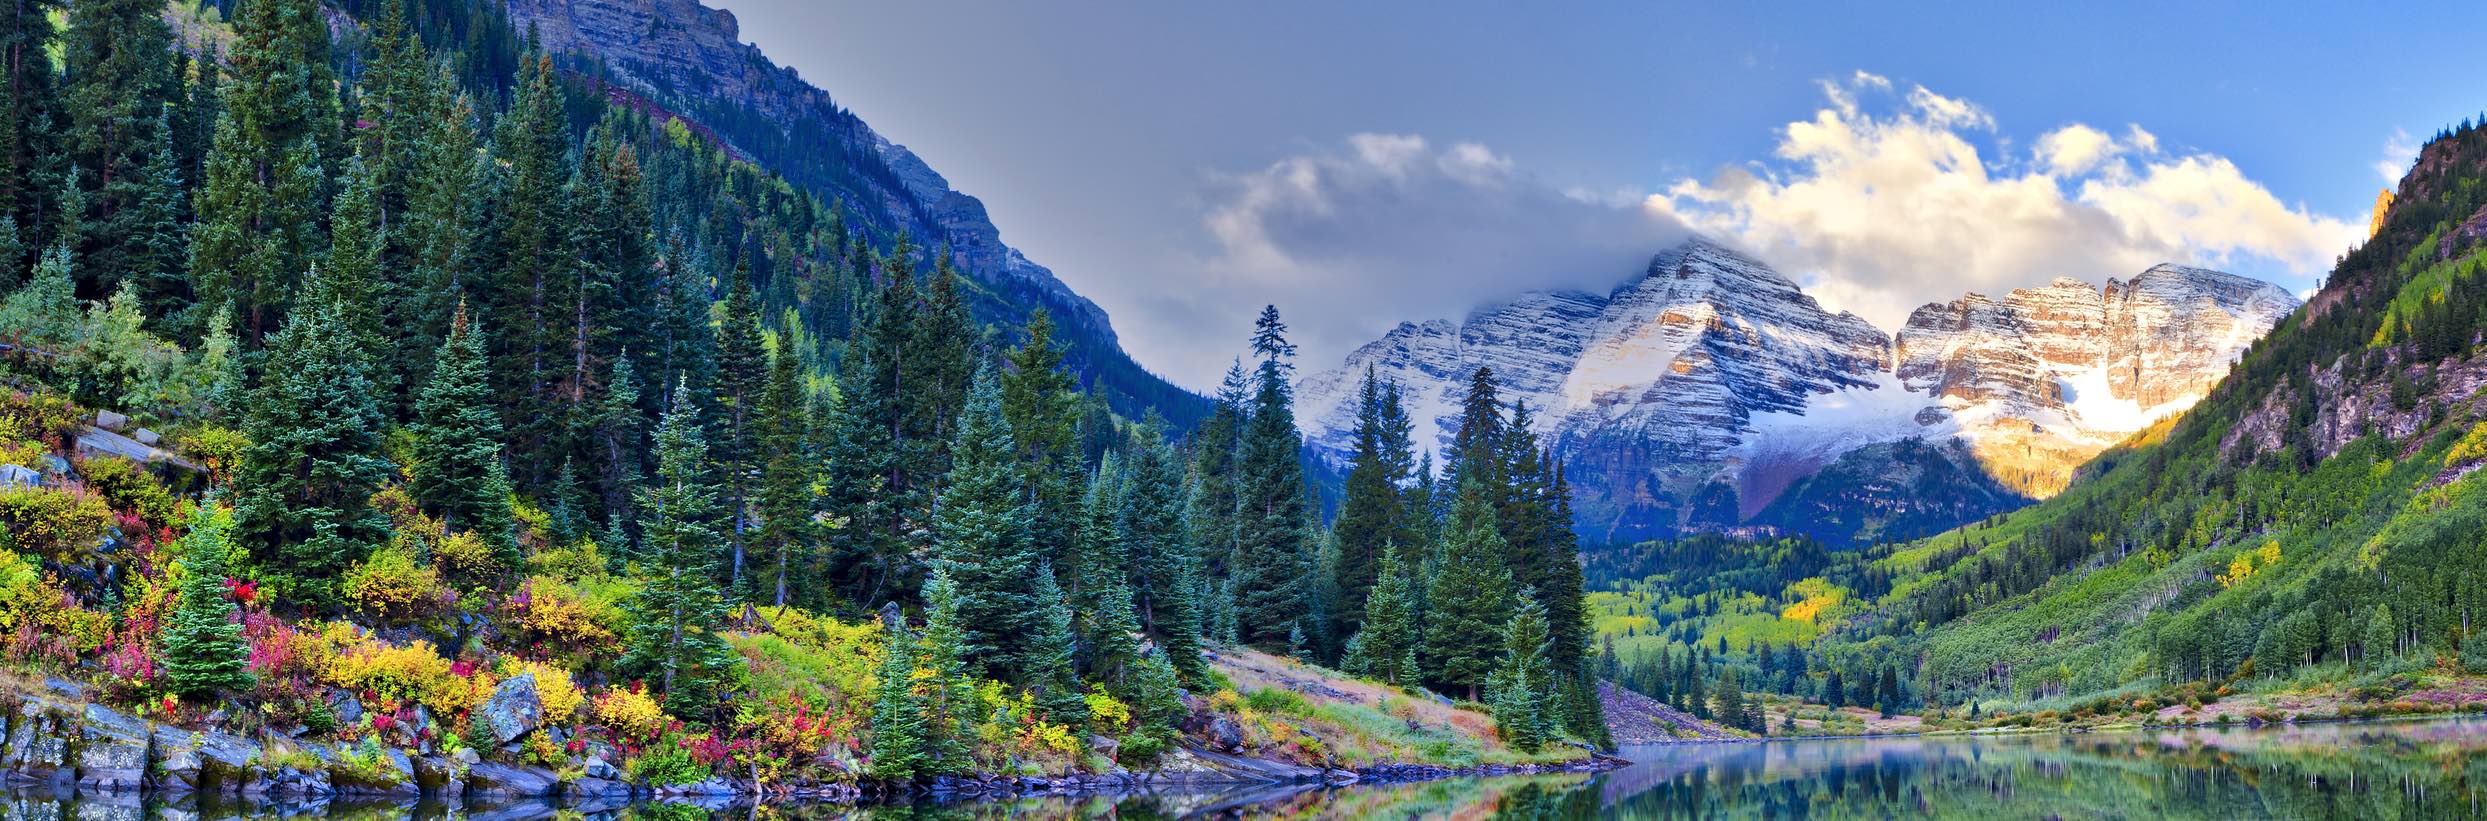 This iconic photo of the Maroon Bells showcases the majestic peaks framed by a surrounding forest and a delicate dusting of snow.